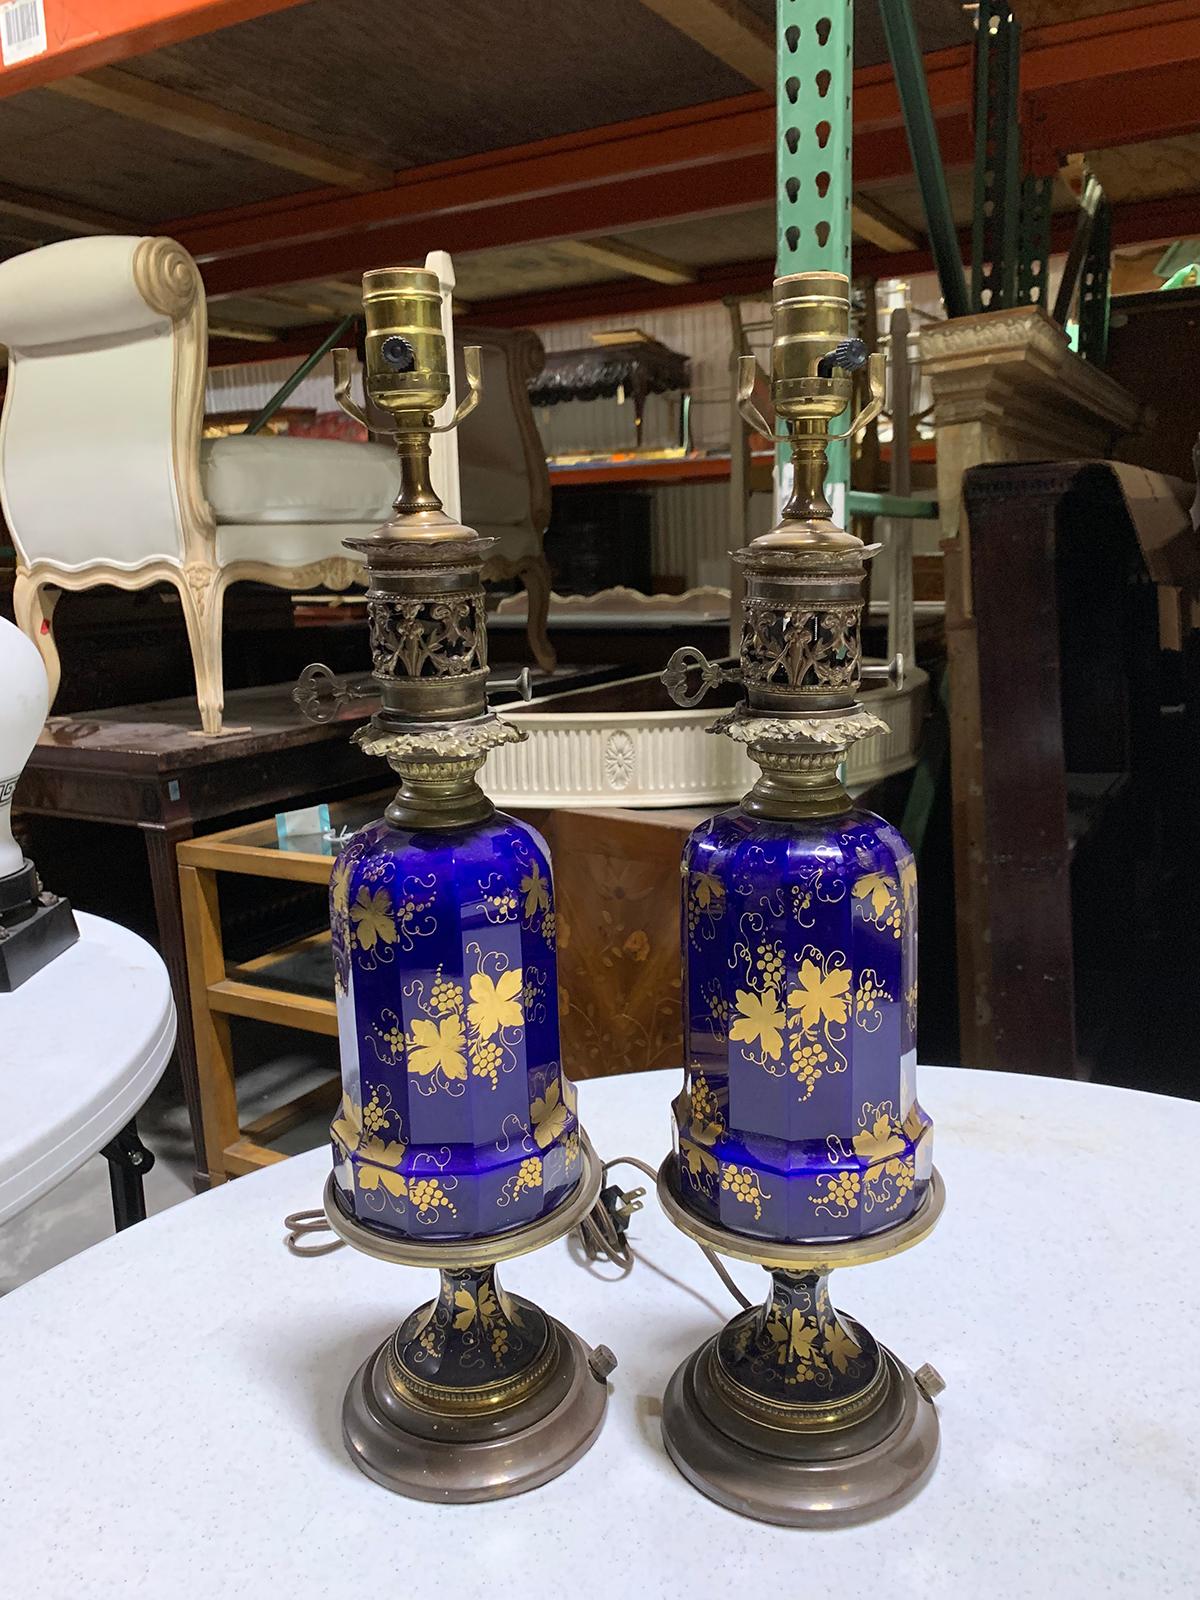 Pair of 19th-20th century cobalt blue and gilt glass oil lamps with grape leaf design
New wiring.